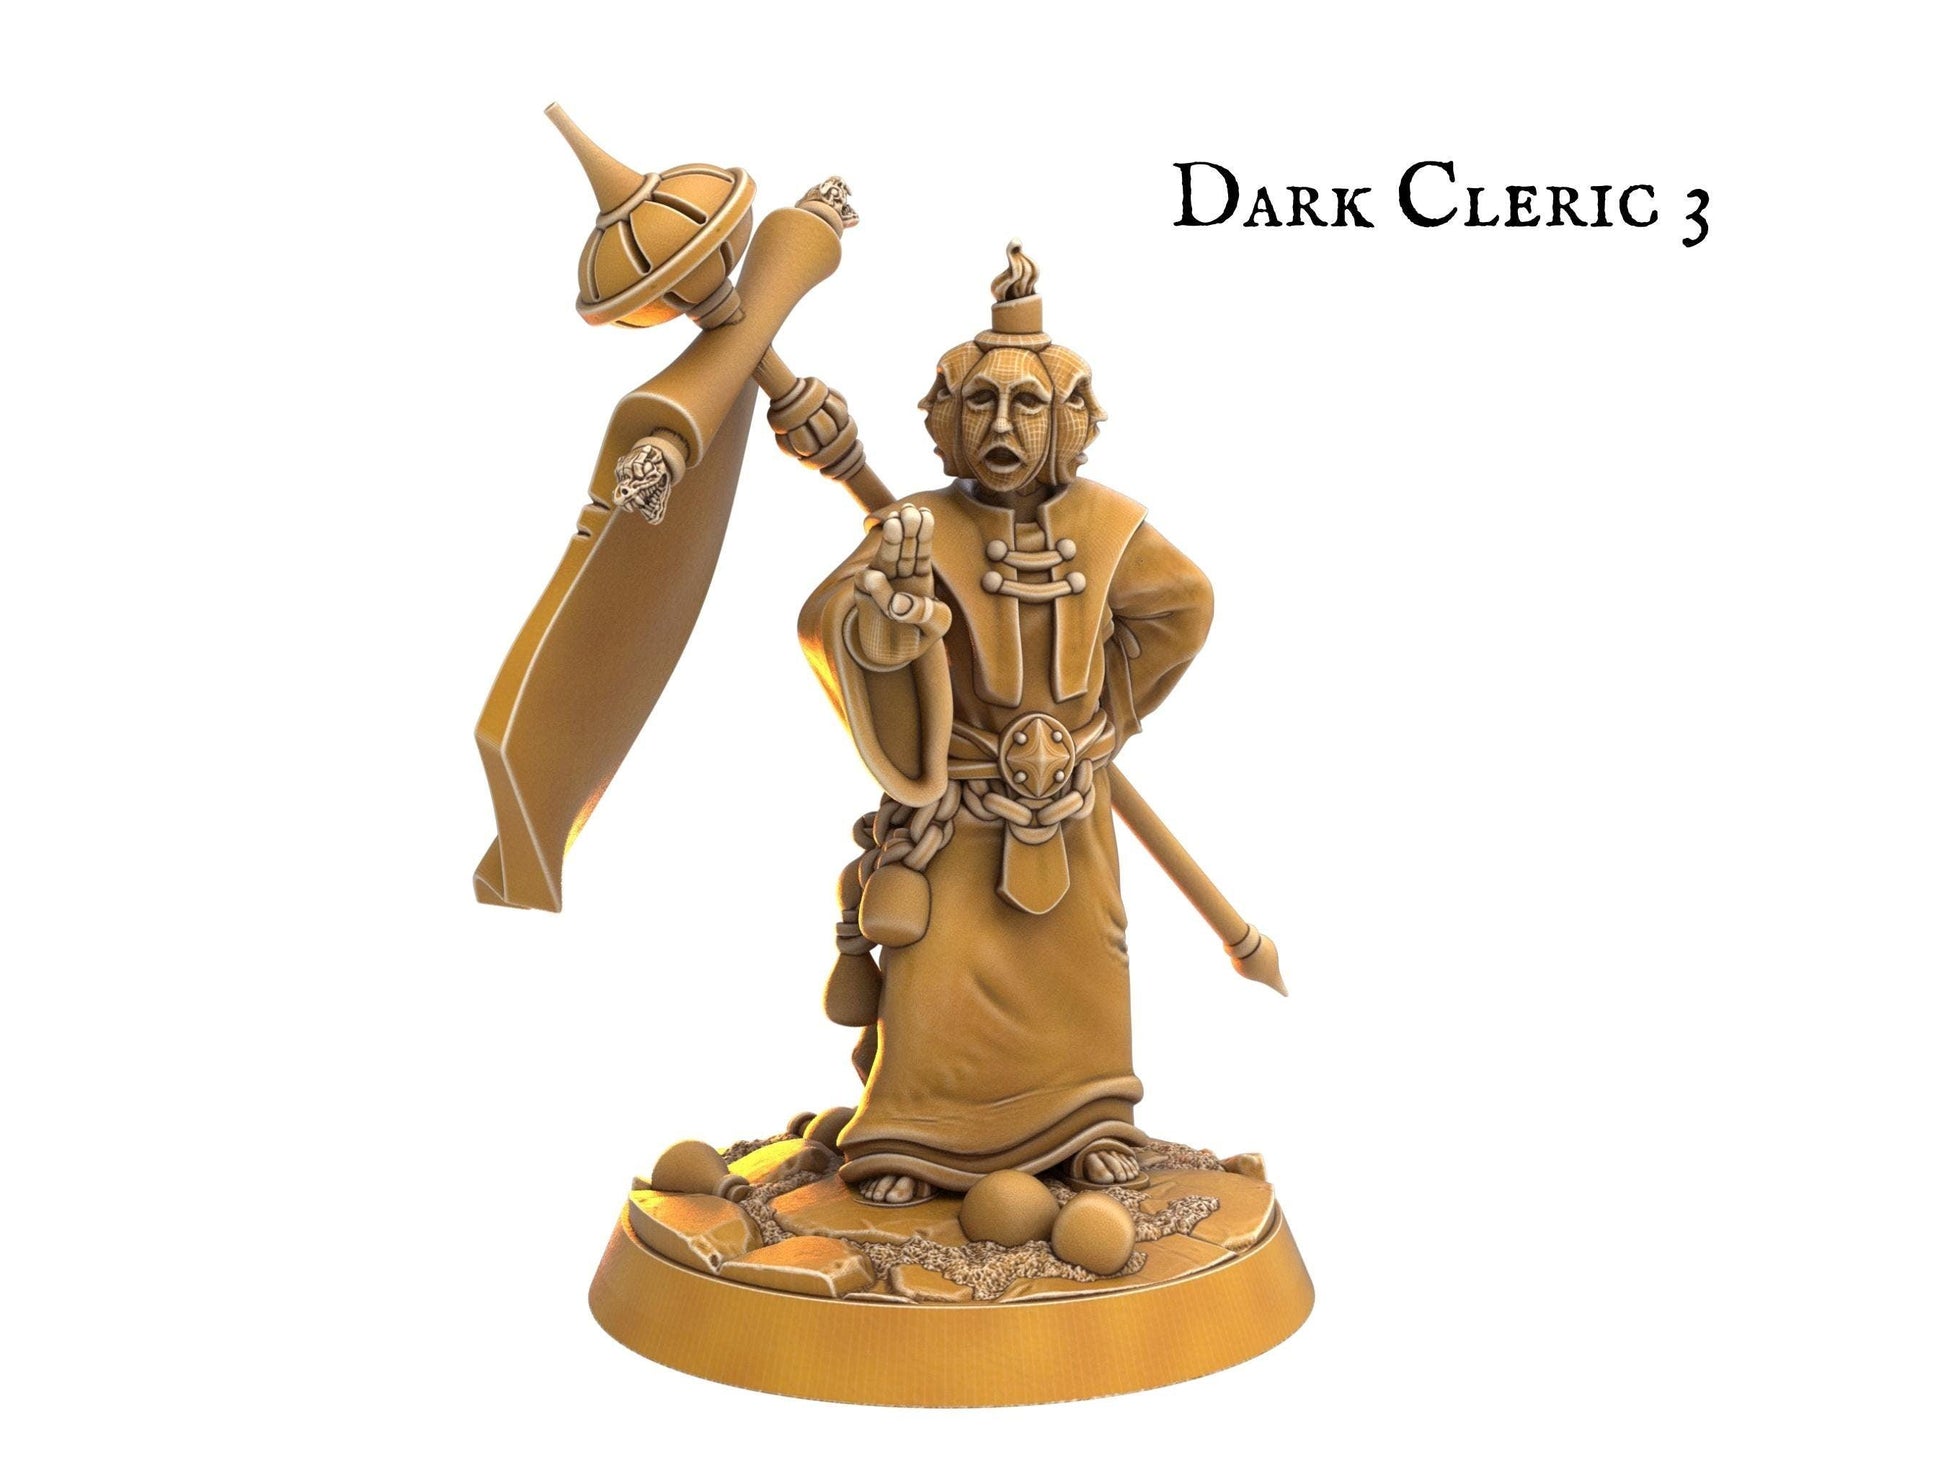 Male Dark Cleric Miniature Warlock Miniature - 5 Poses - 32mm scale Tabletop gaming DnD Miniature Dungeons and Dragons, dungeon master - Plague Miniatures shop for DnD Miniatures